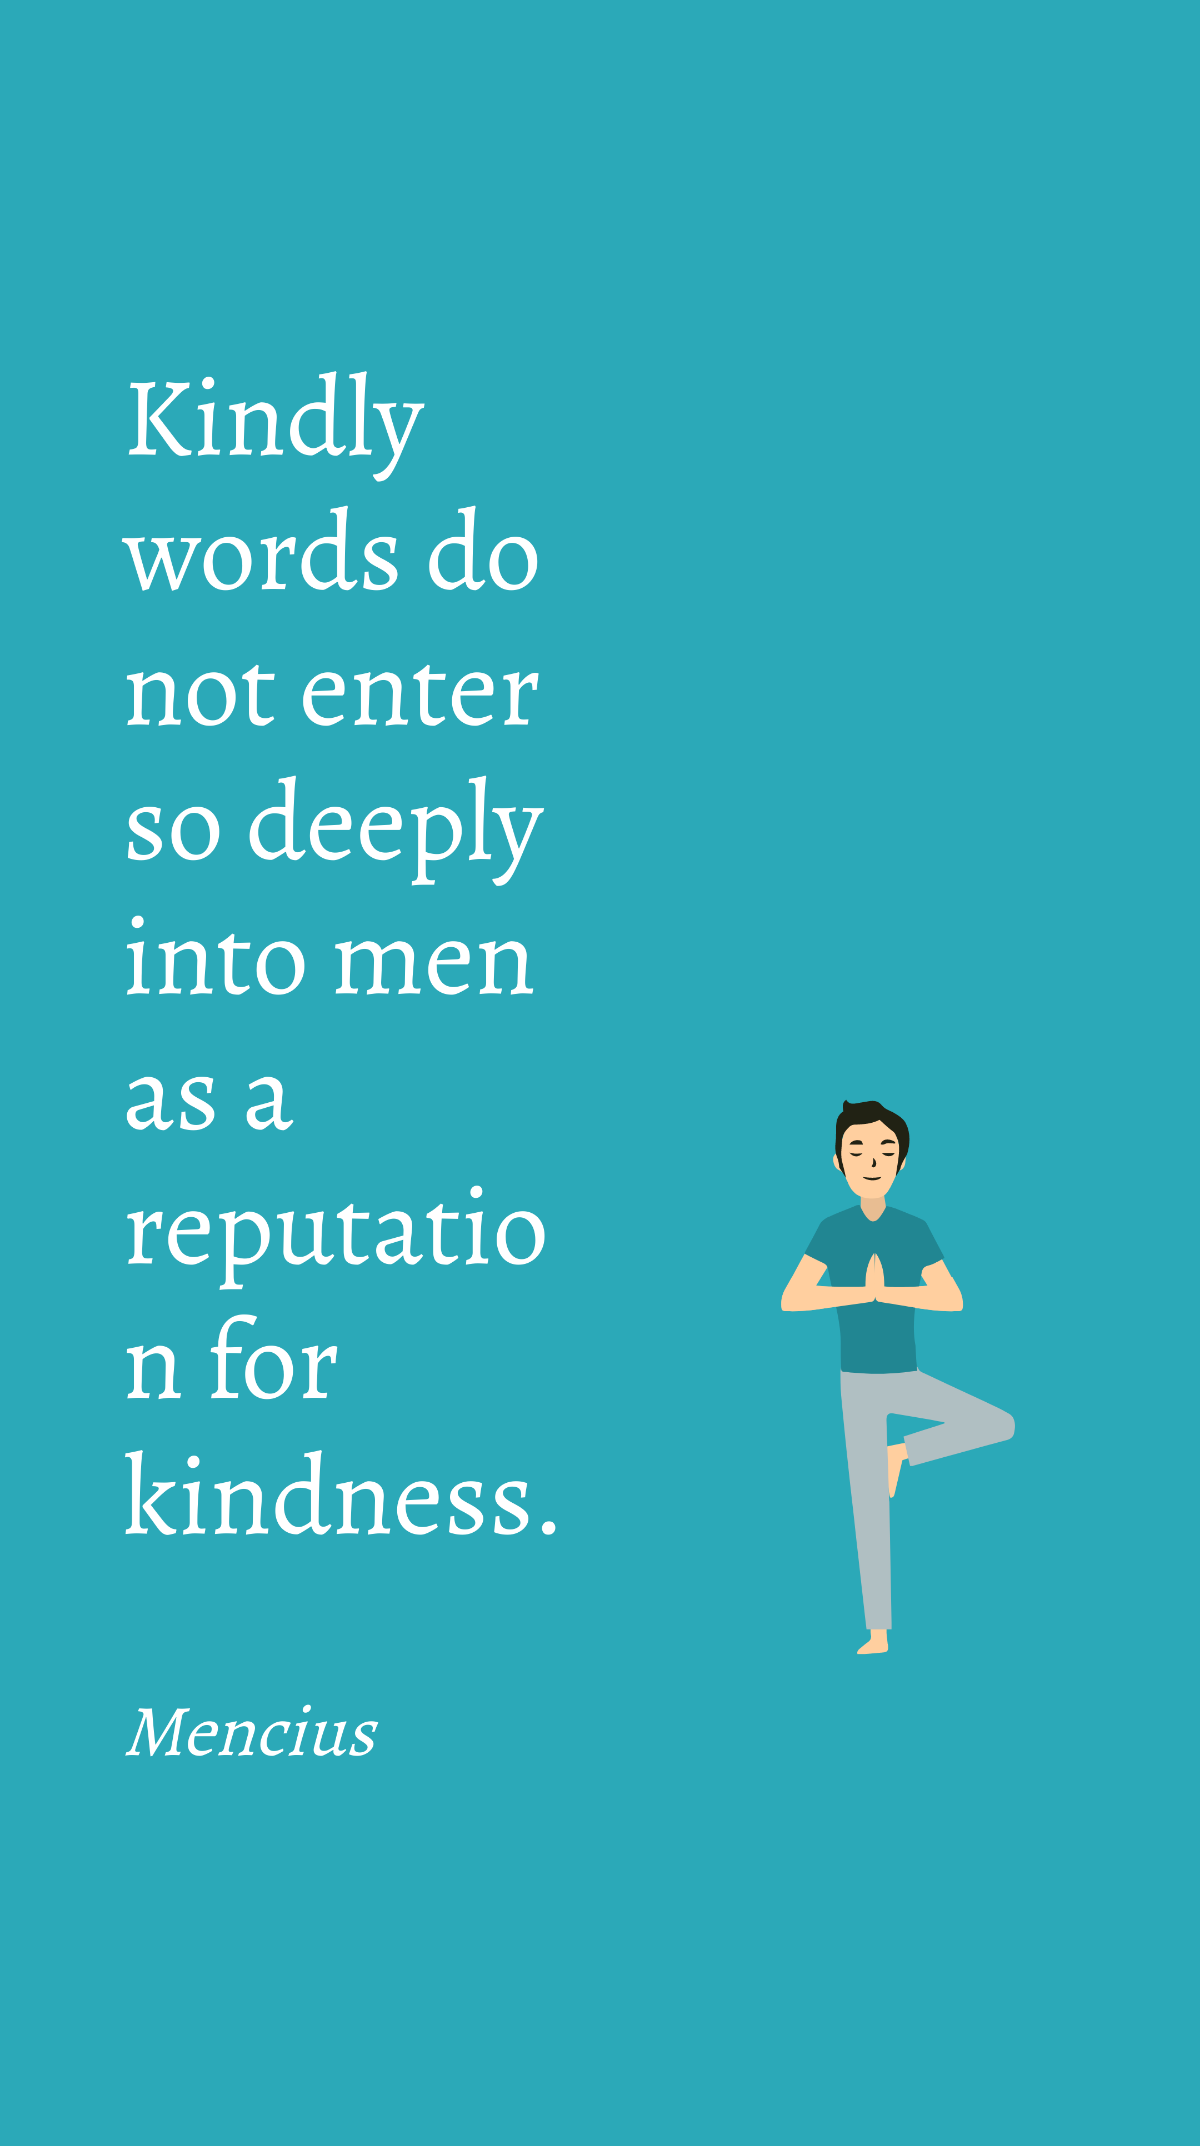 Mencius - Kindly words do not enter so deeply into men as a reputation for kindness. Template